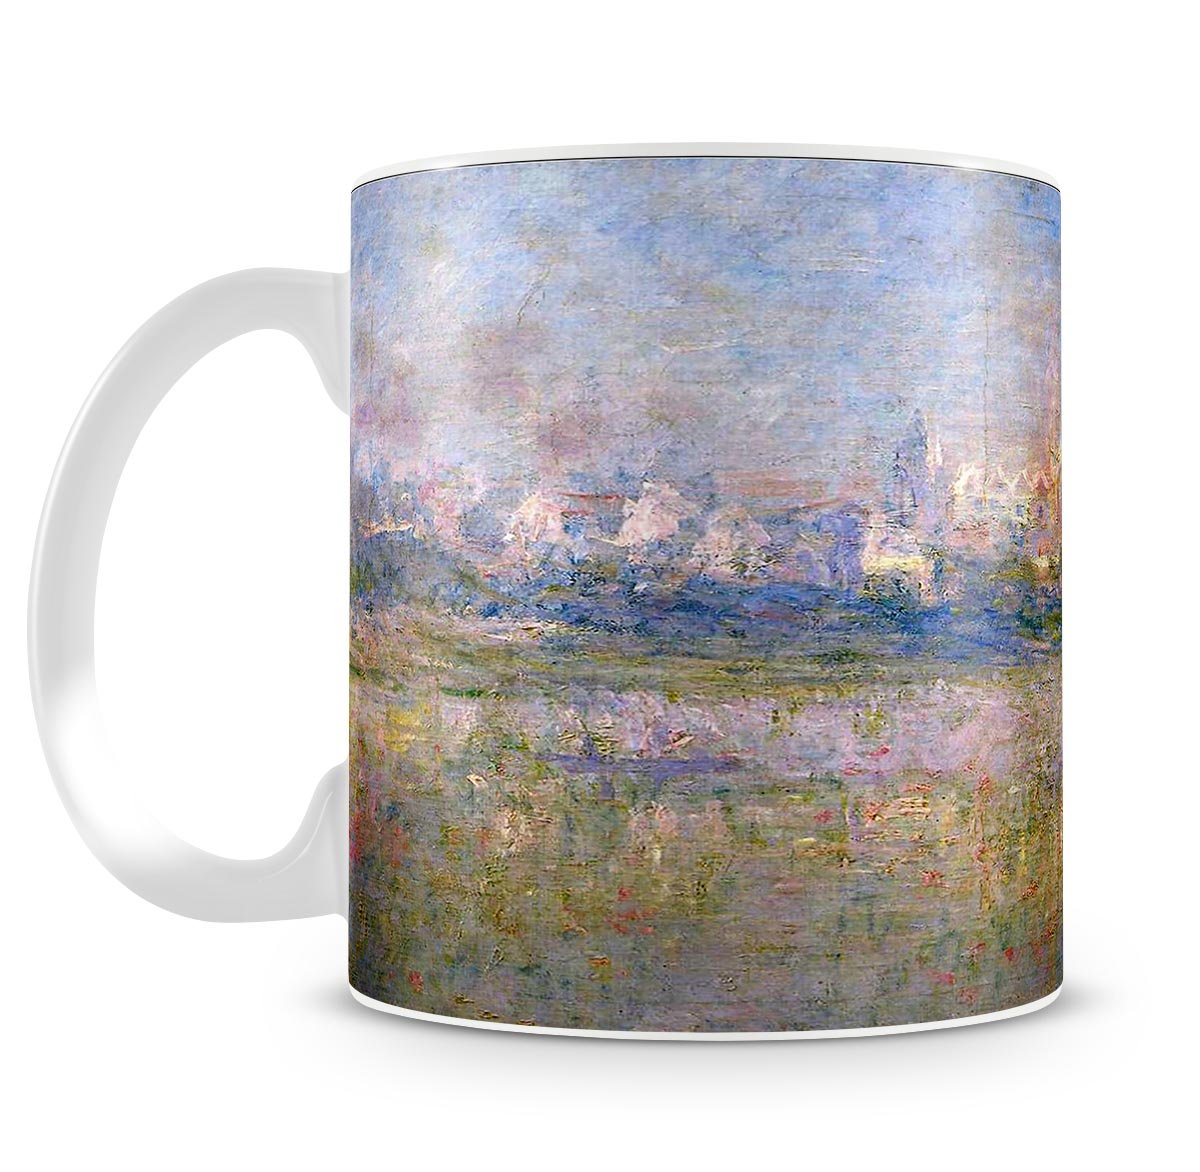 Vctheuil in the fog by Monet Mug - Canvas Art Rocks - 4